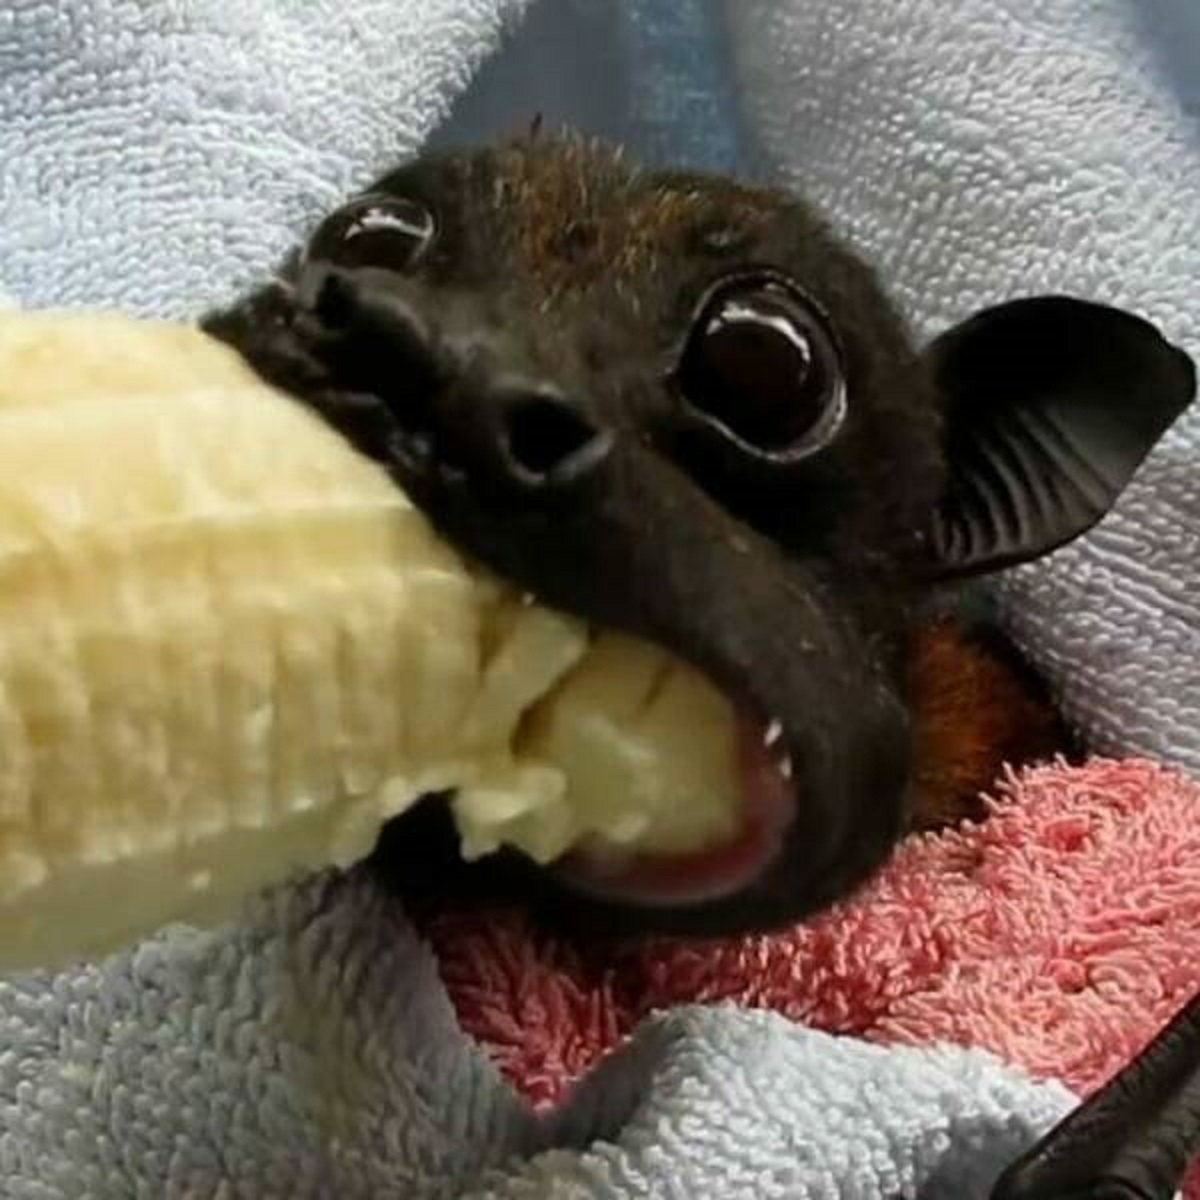 "Without Bats, Say Goodbye To Bananas, Avocados And Mangoes. Over 300 Species Of Fruit Depend On Bats For Pollination"